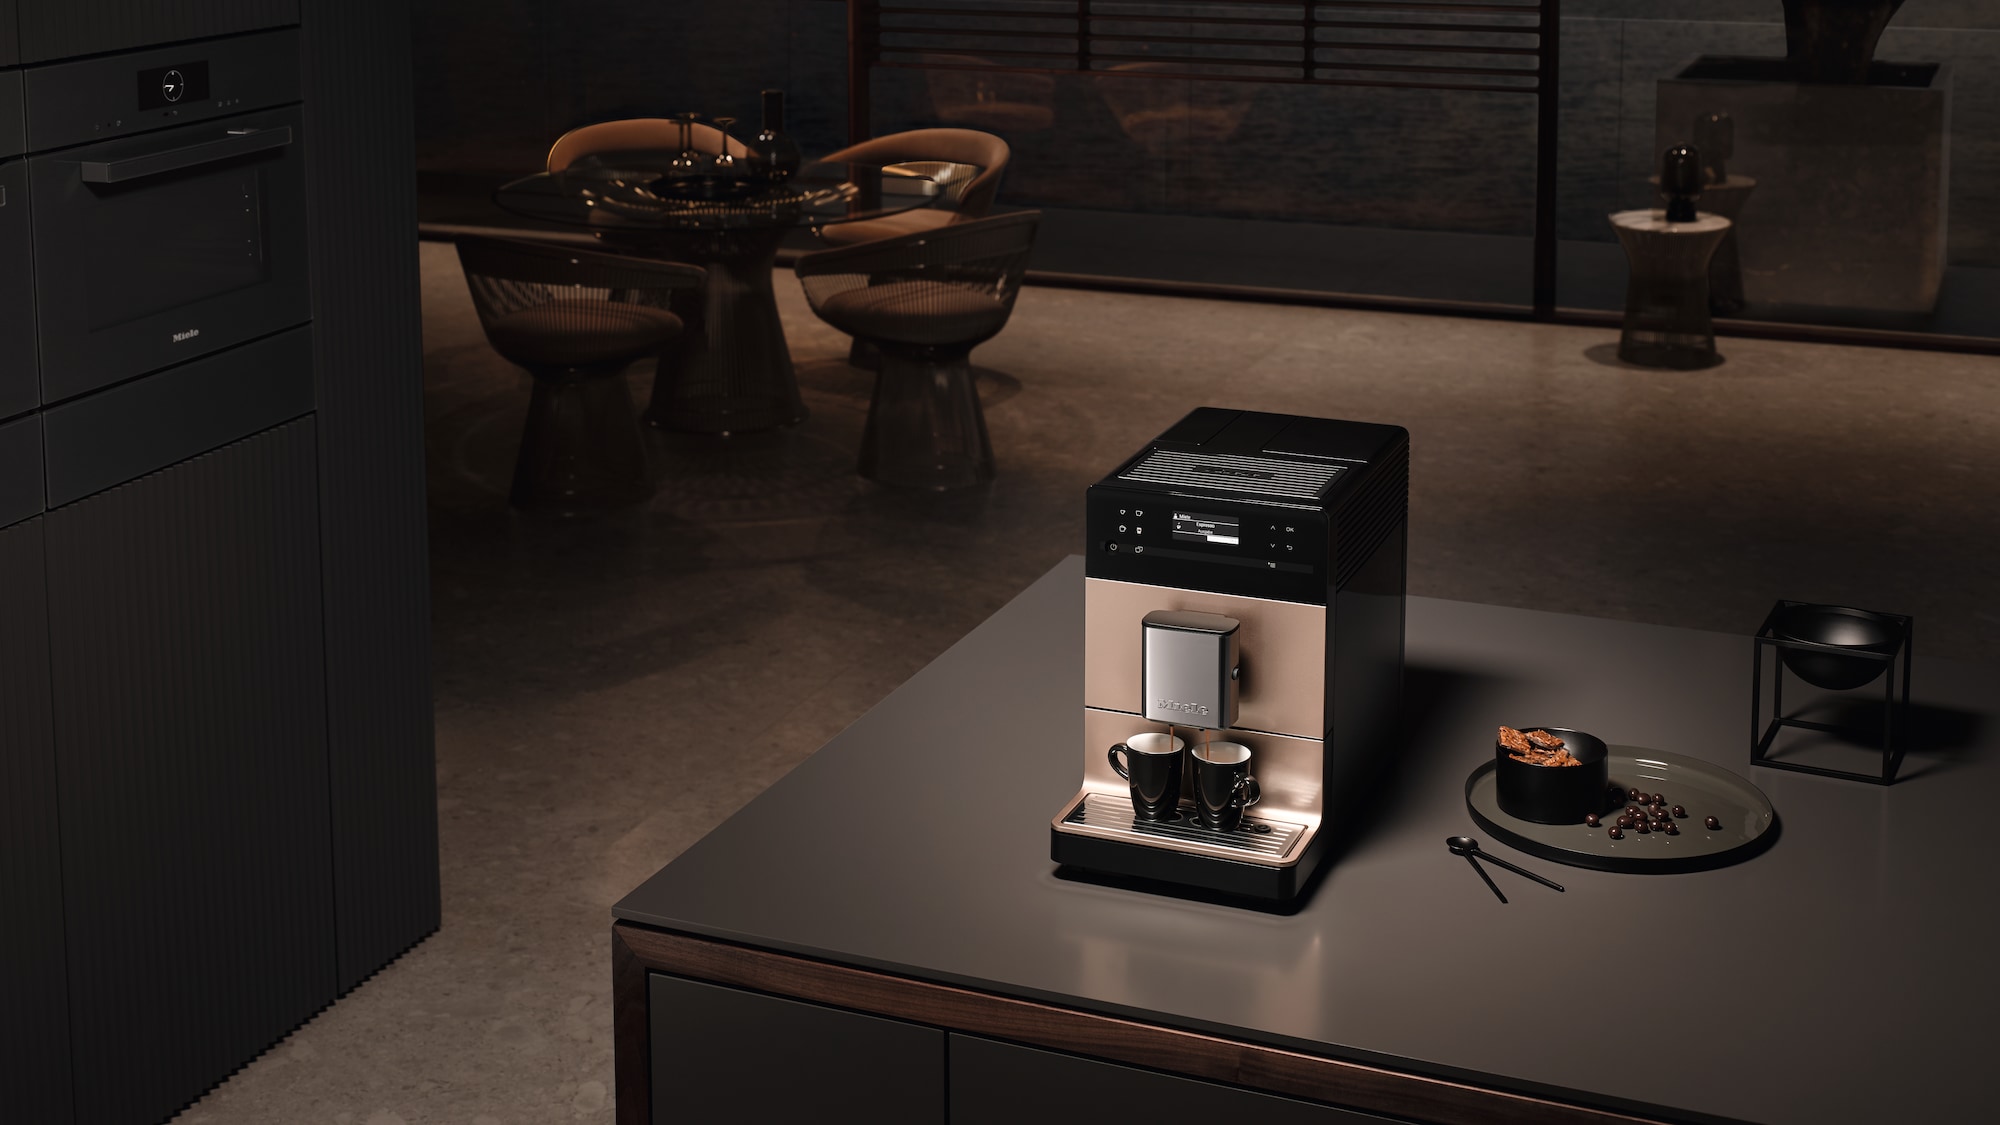 Bean to Cup Office Coffee Equipment in New York City - Corporate